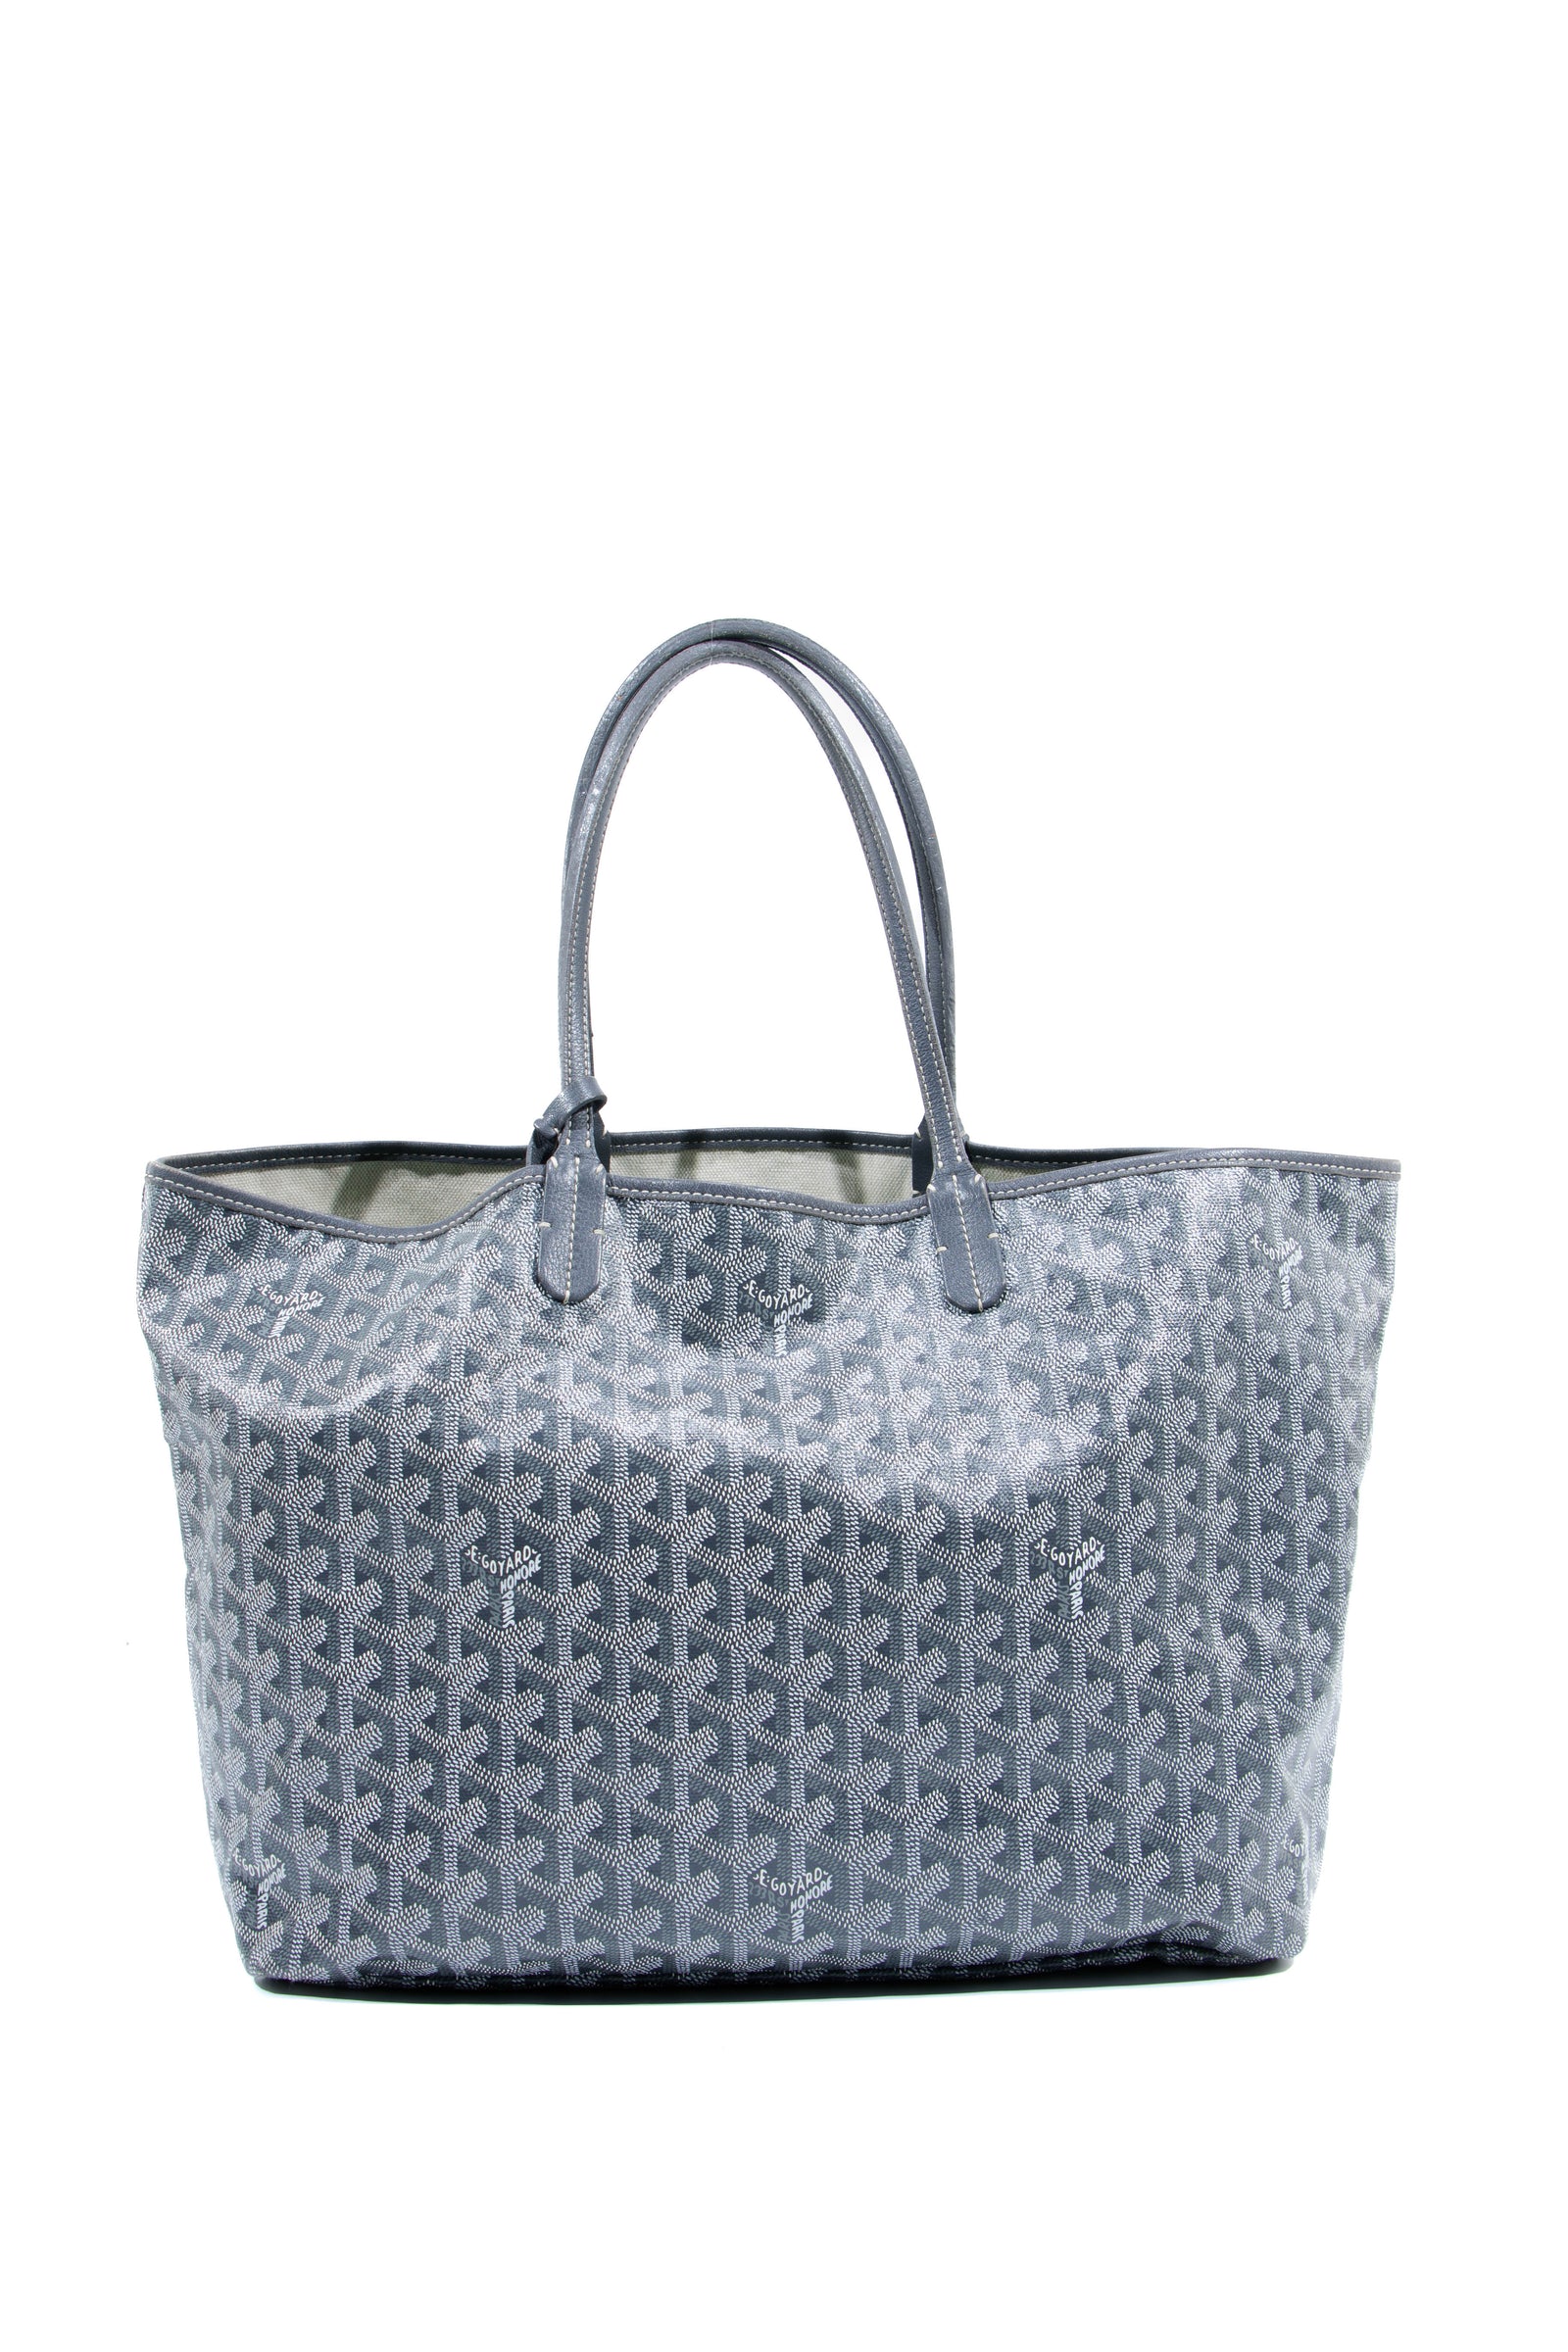 Buy 100% Cotton The Green Rising White Tote Bag for Men and Women Online In  India at